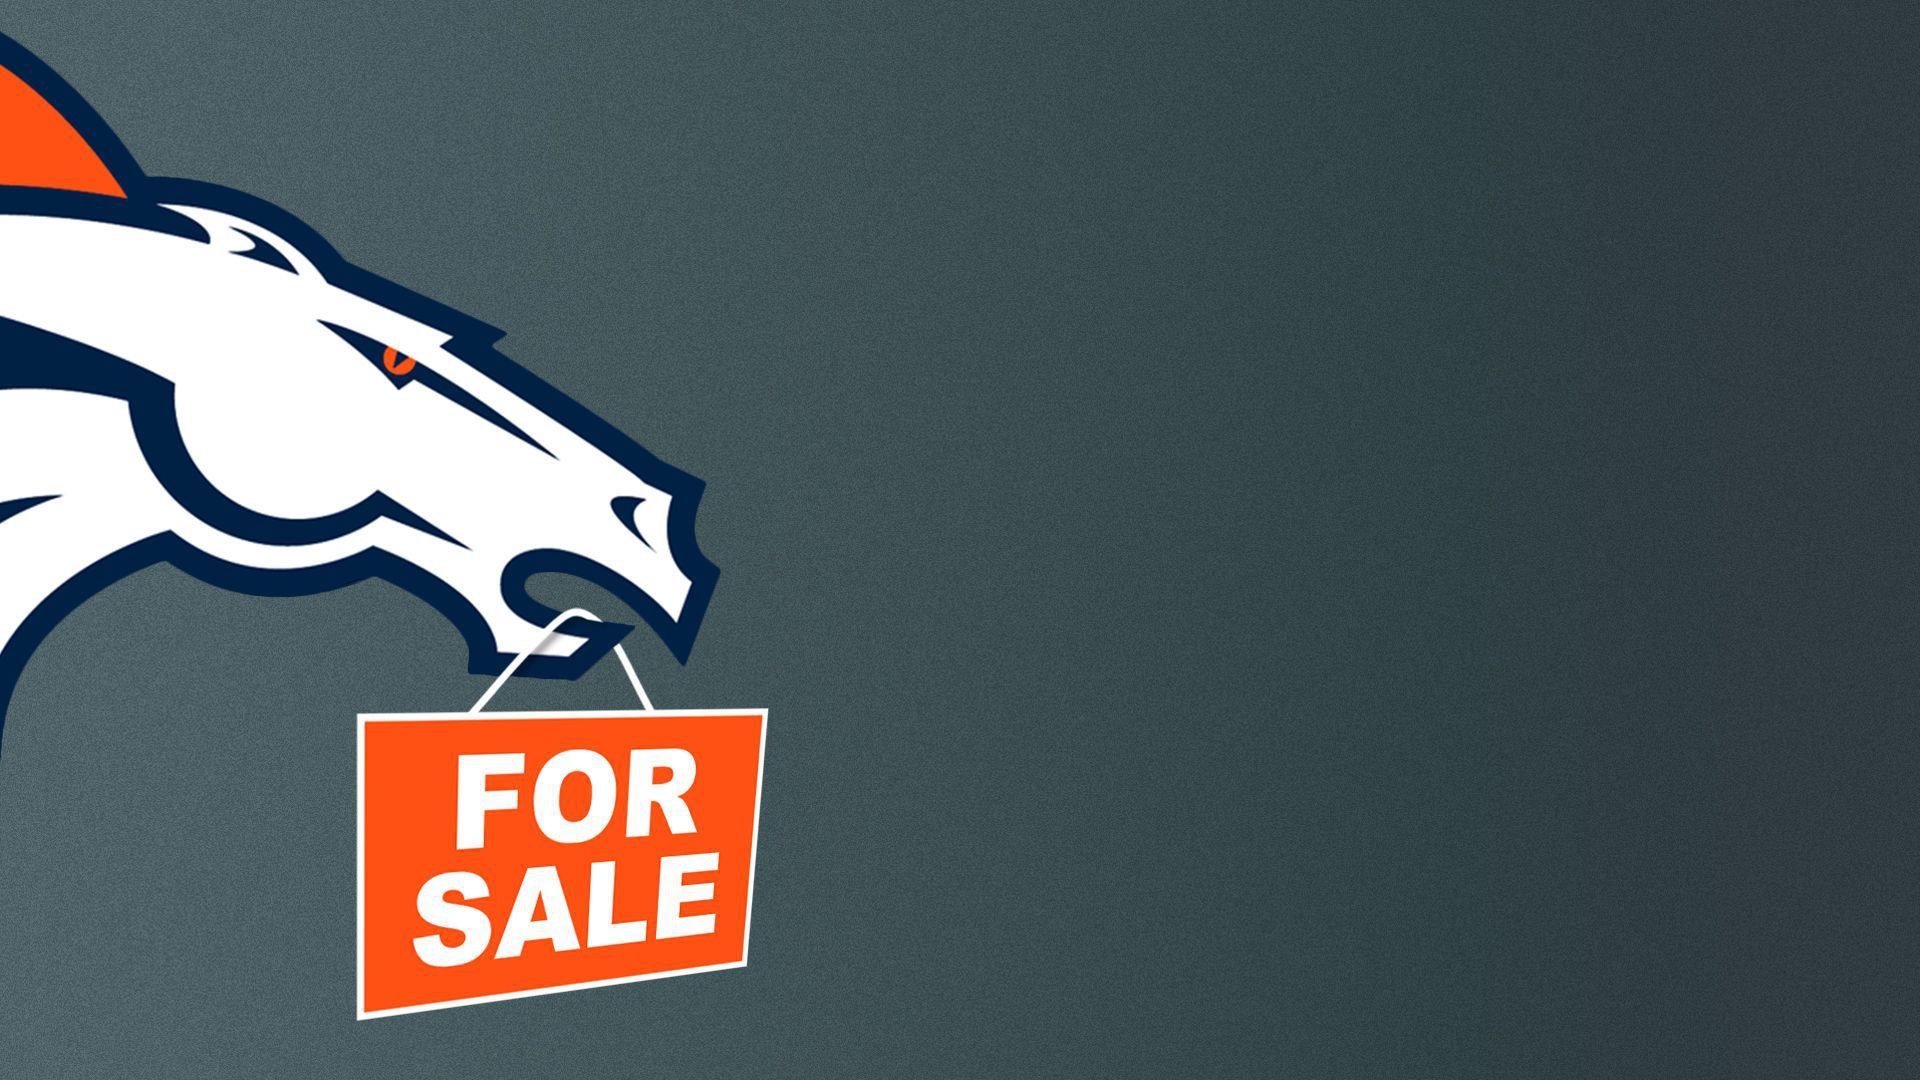 Illustration of the Denver Bronco's mascot logo with a "for sale" sign hanging from it's mouth.